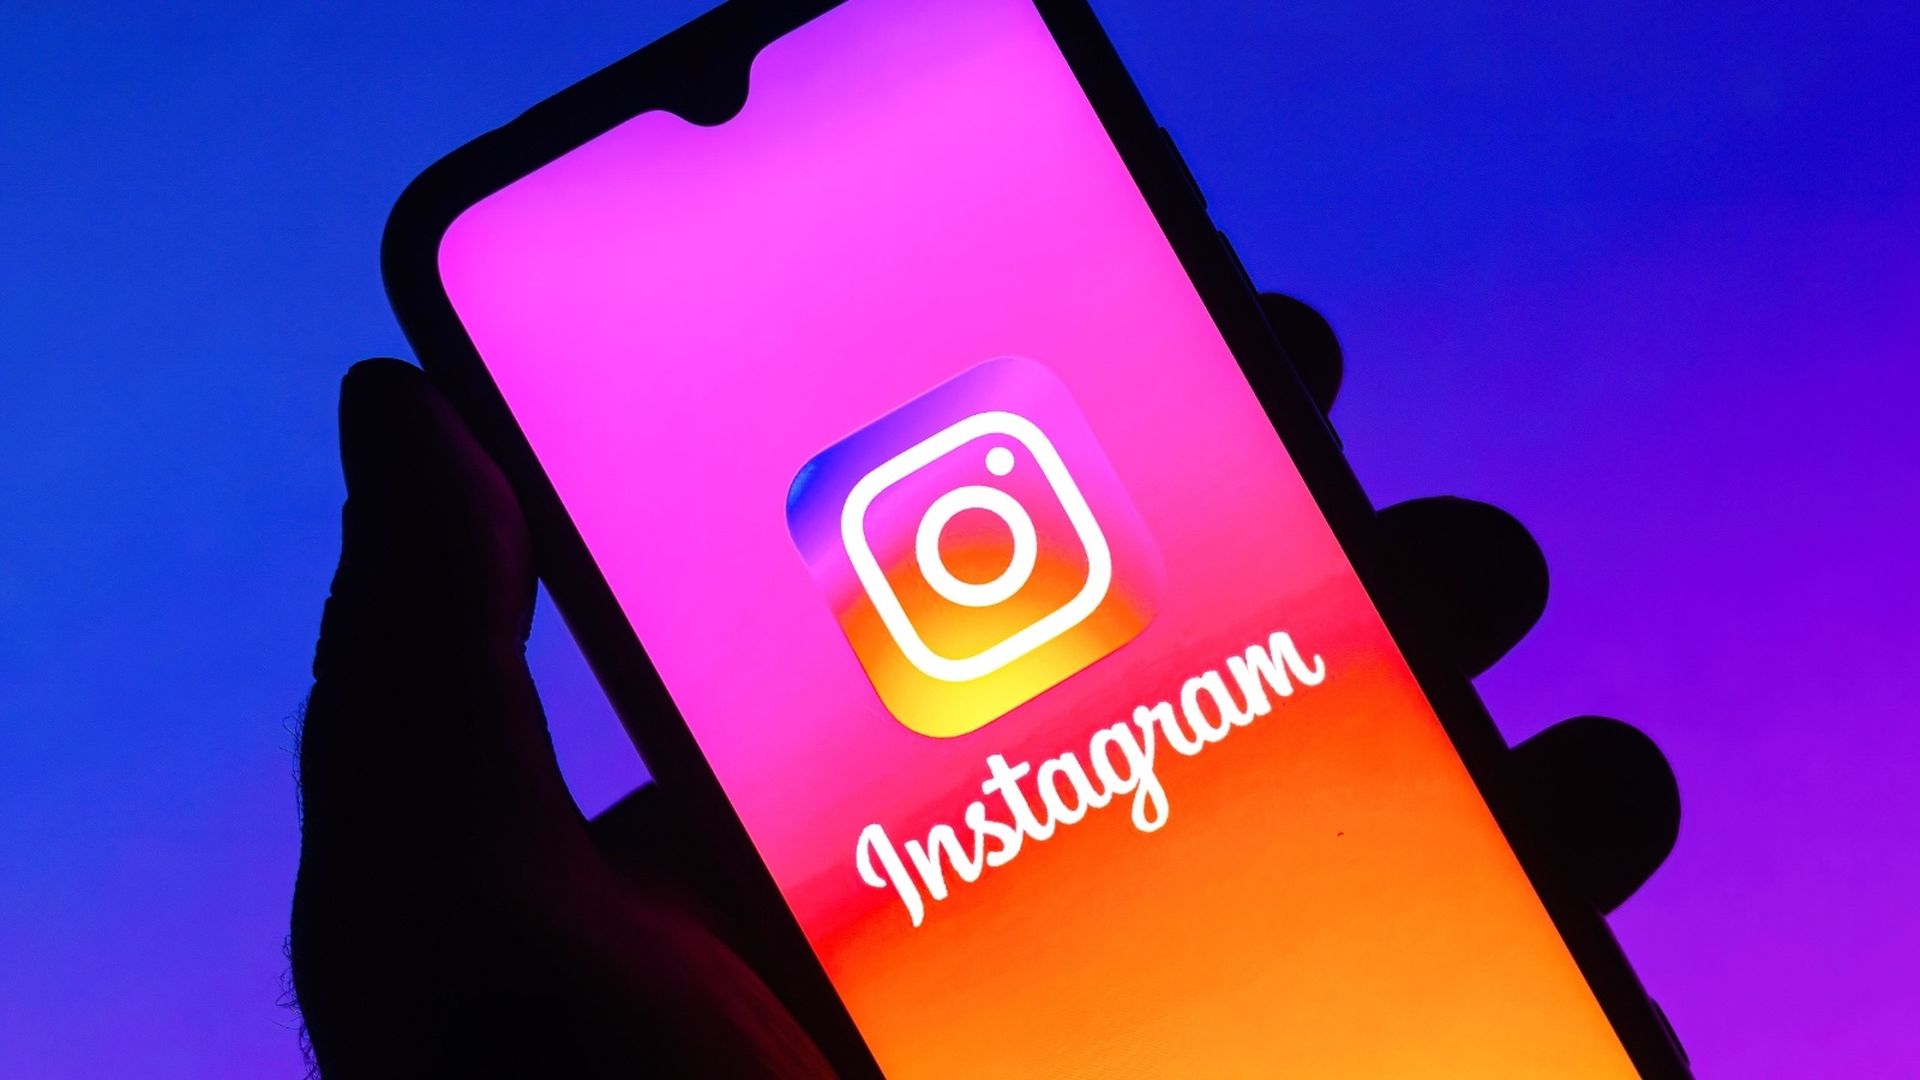 In this article, we are going to cover how to fix Instagram camera not working, so you can use the popular social media app whenever you want to.